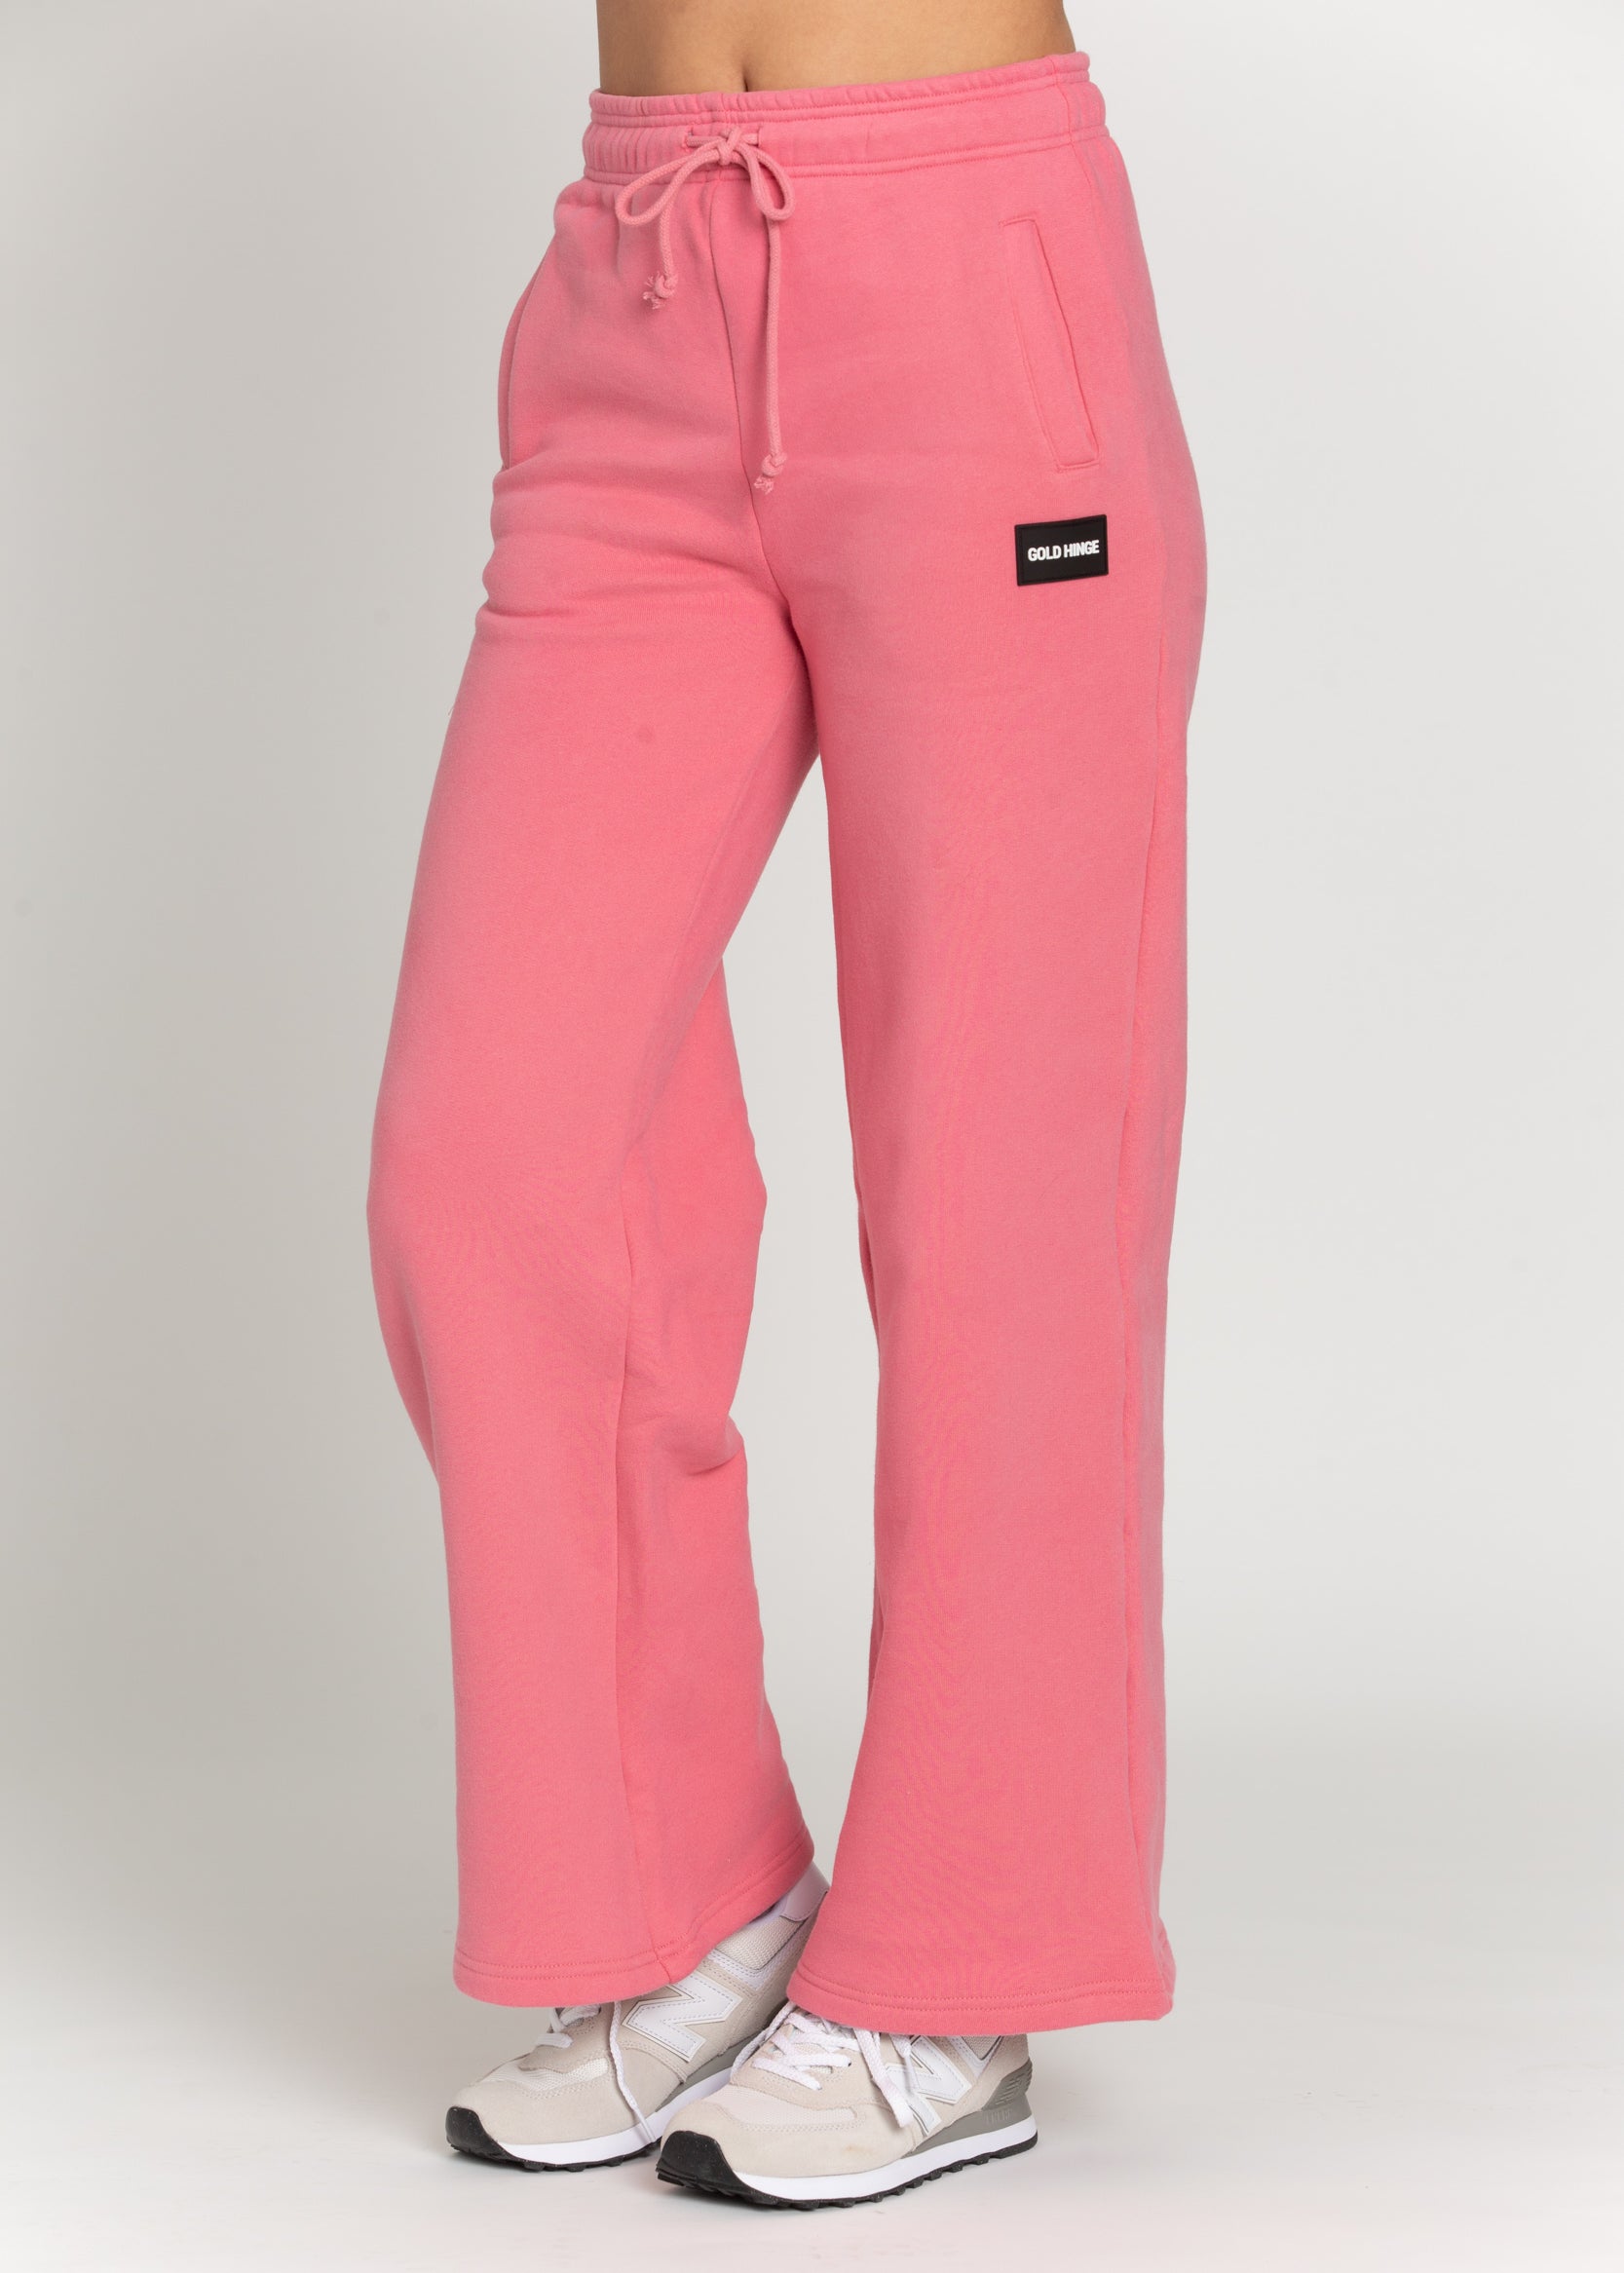 Our Rouge Wide Leg Sweatpants are the perfect combination of style and comfort, with soft fabric and functional pockets. Complete the look with a matching sweatshirt, or pair with any Gold Hinge top. Get them today and enjoy the comfort and convenience they provide.